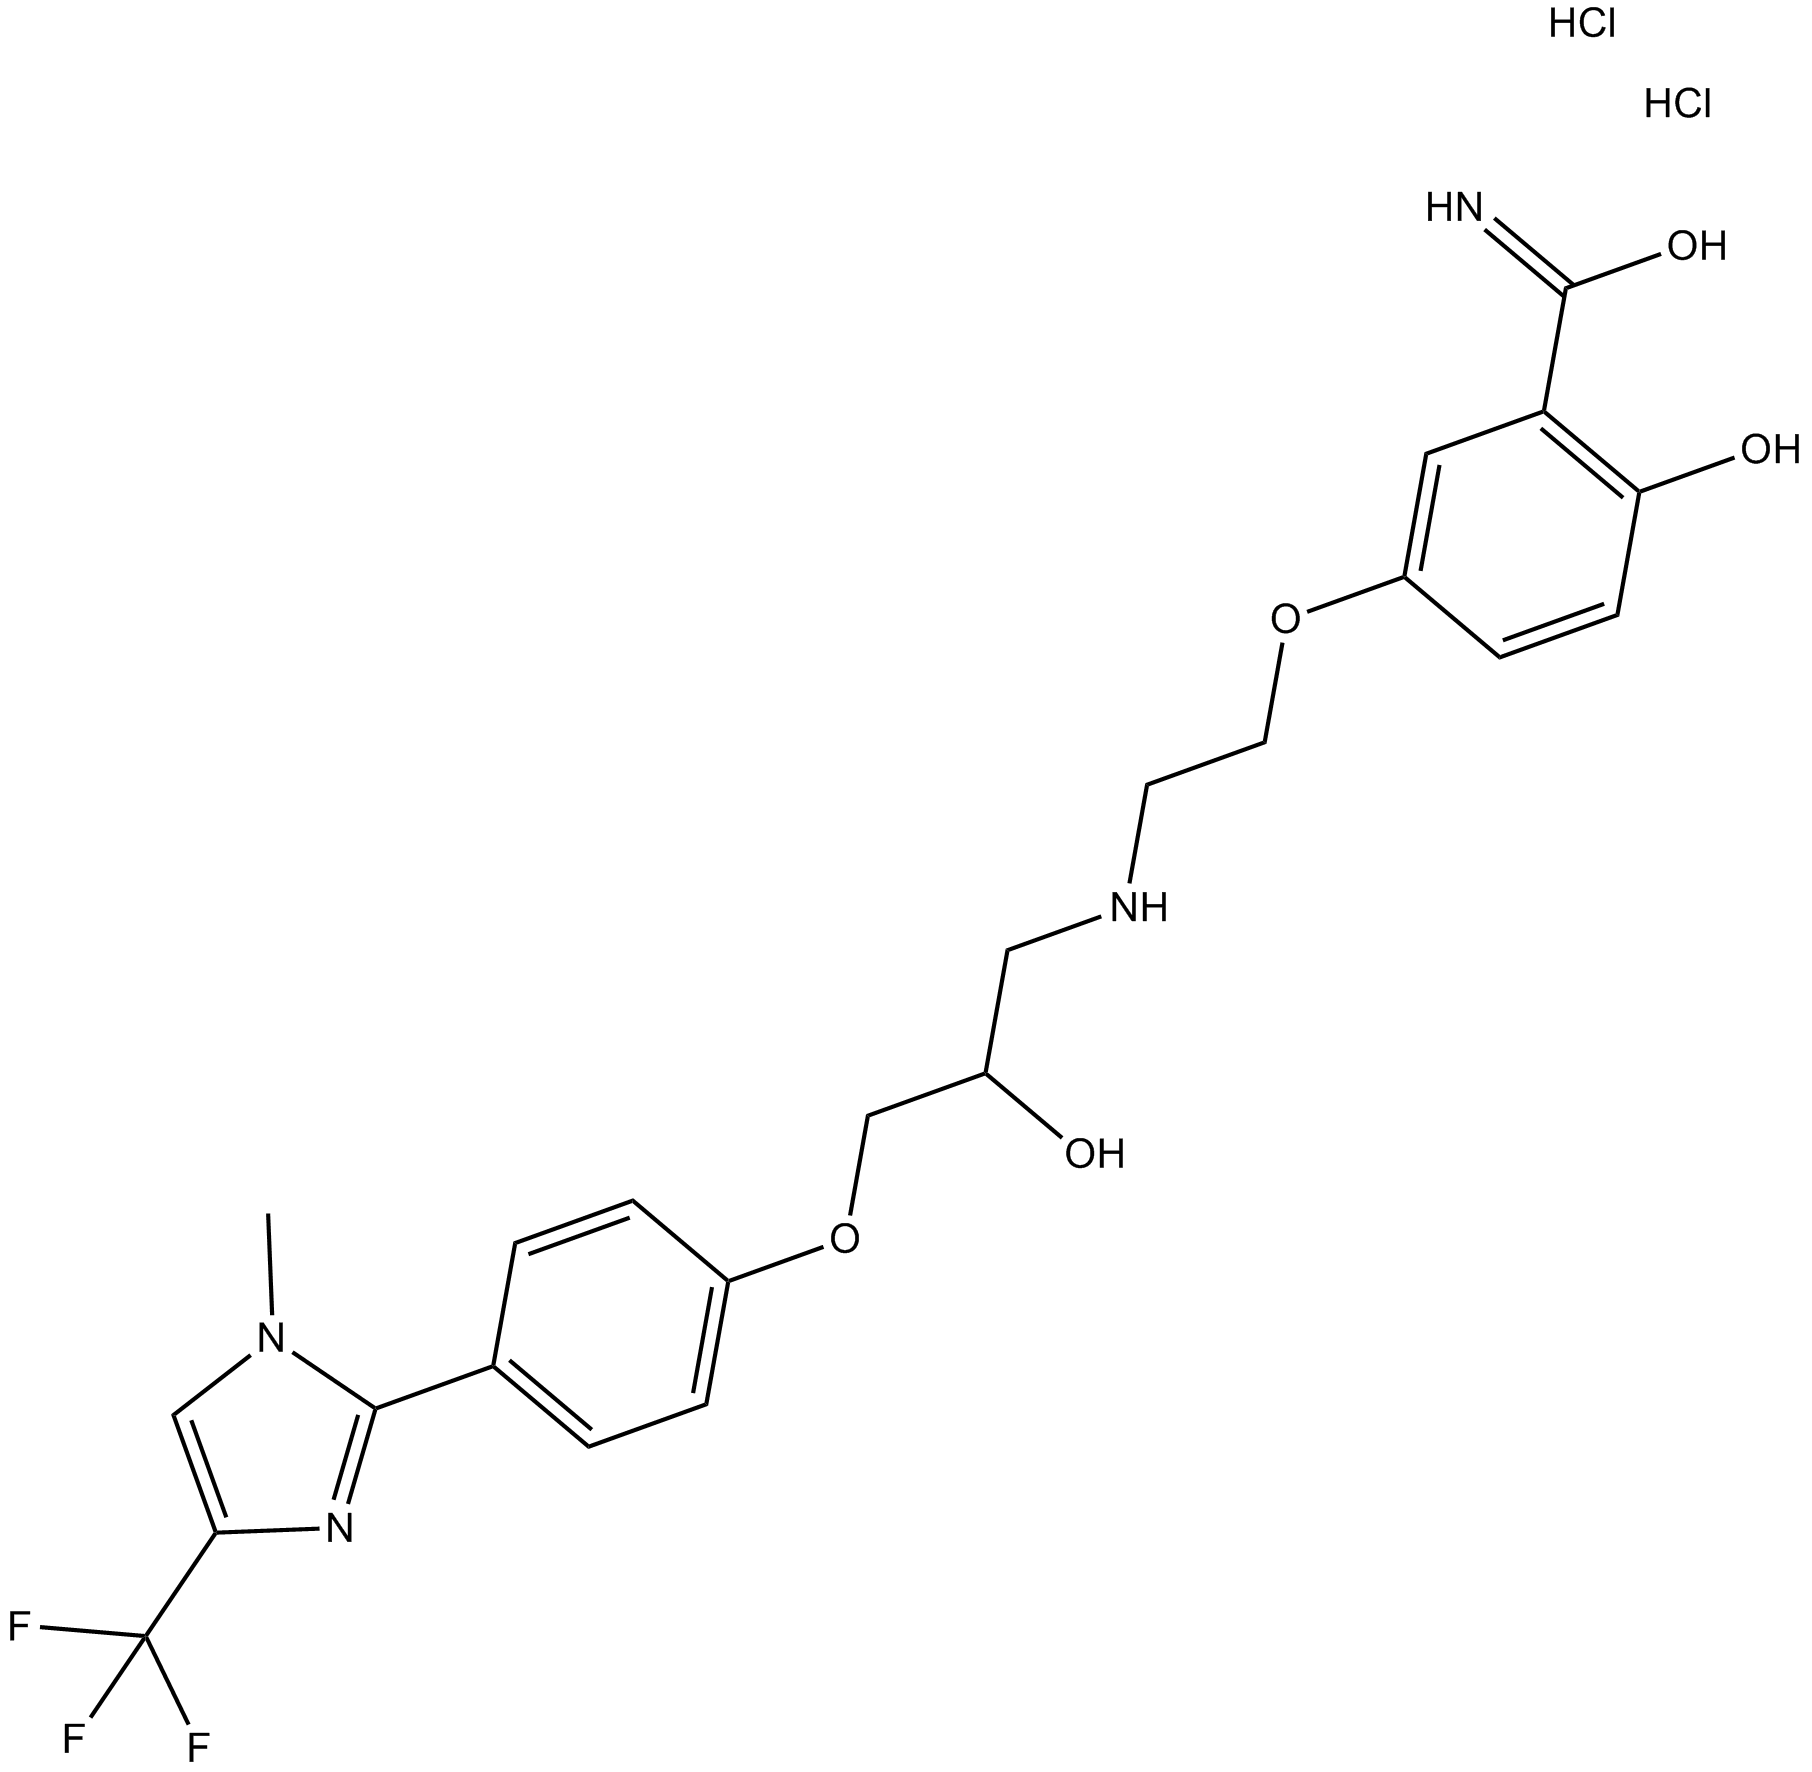 CGP 20712 dihydrochloride  Chemical Structure